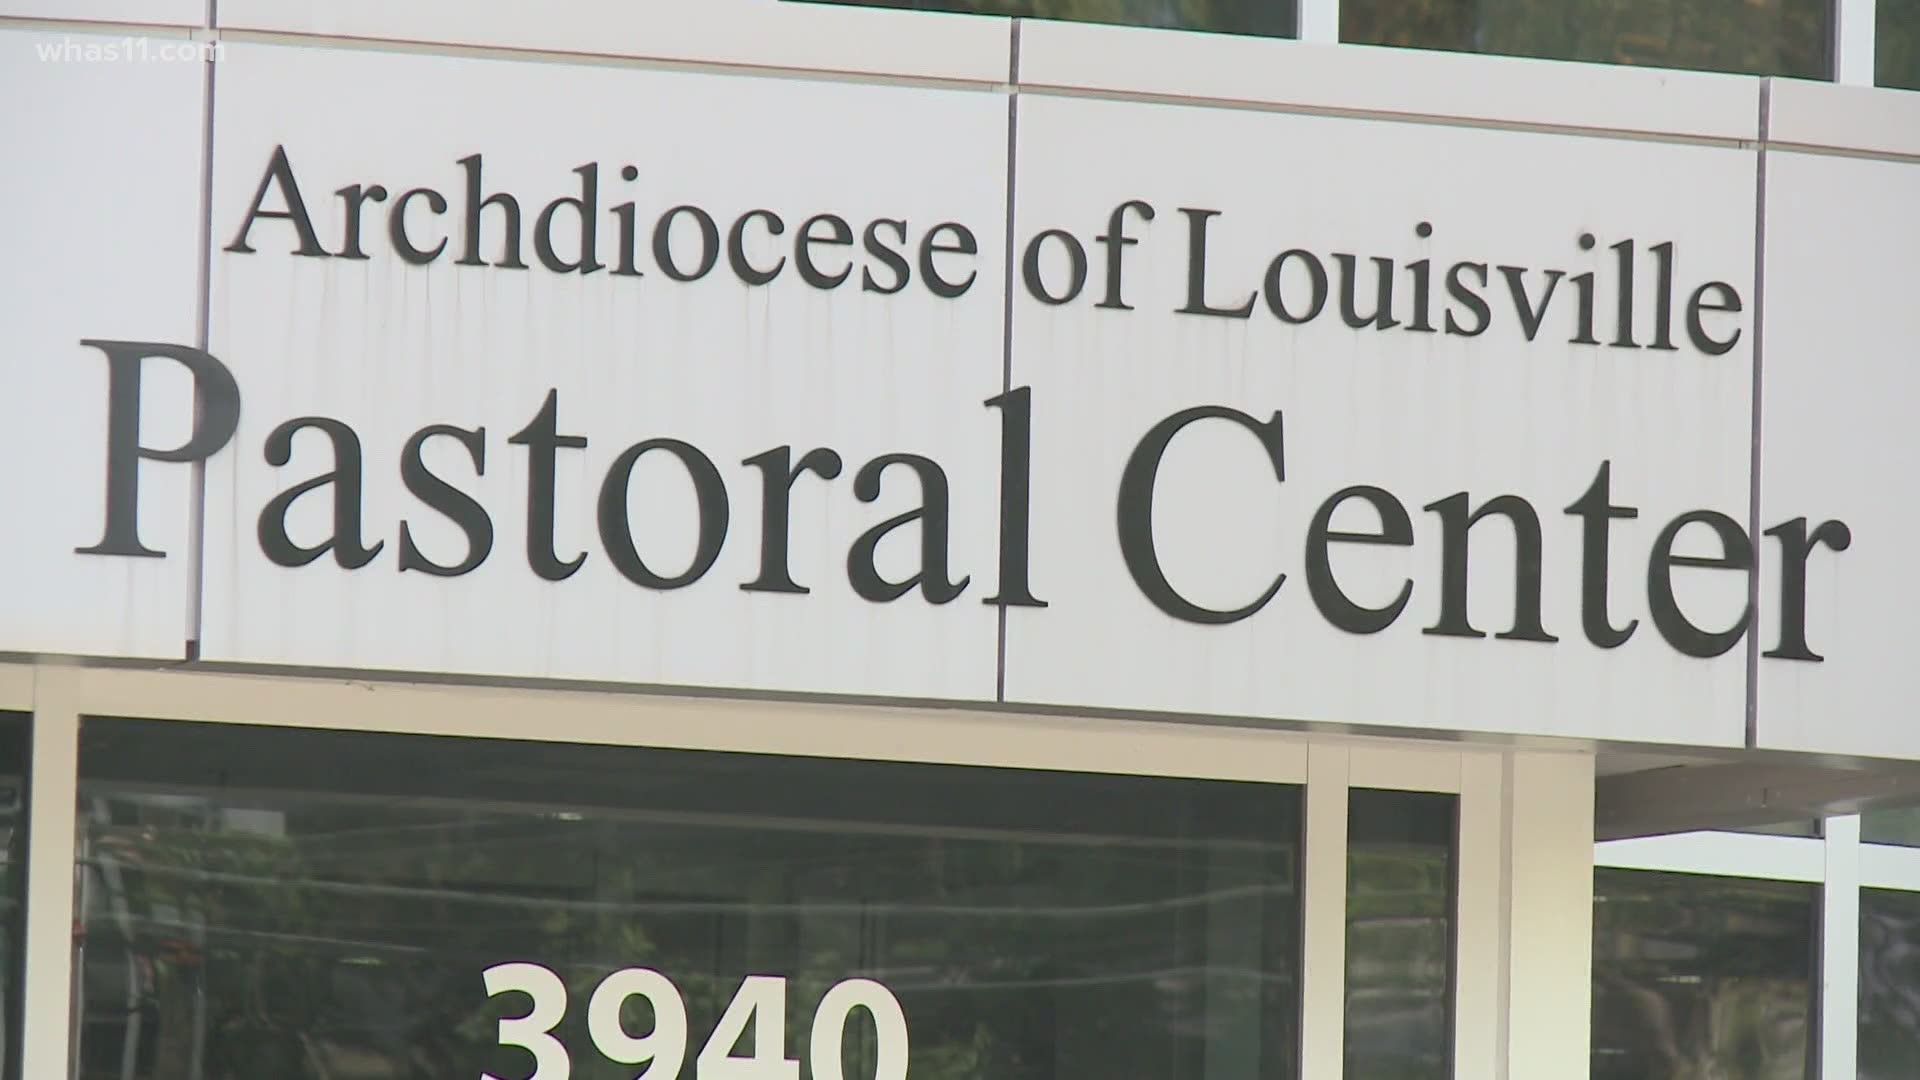 The Archdiocese of Louisville and other Kentucky diocese said they plan to resume classes in-person, but will evaluate for changes Sept. 6.